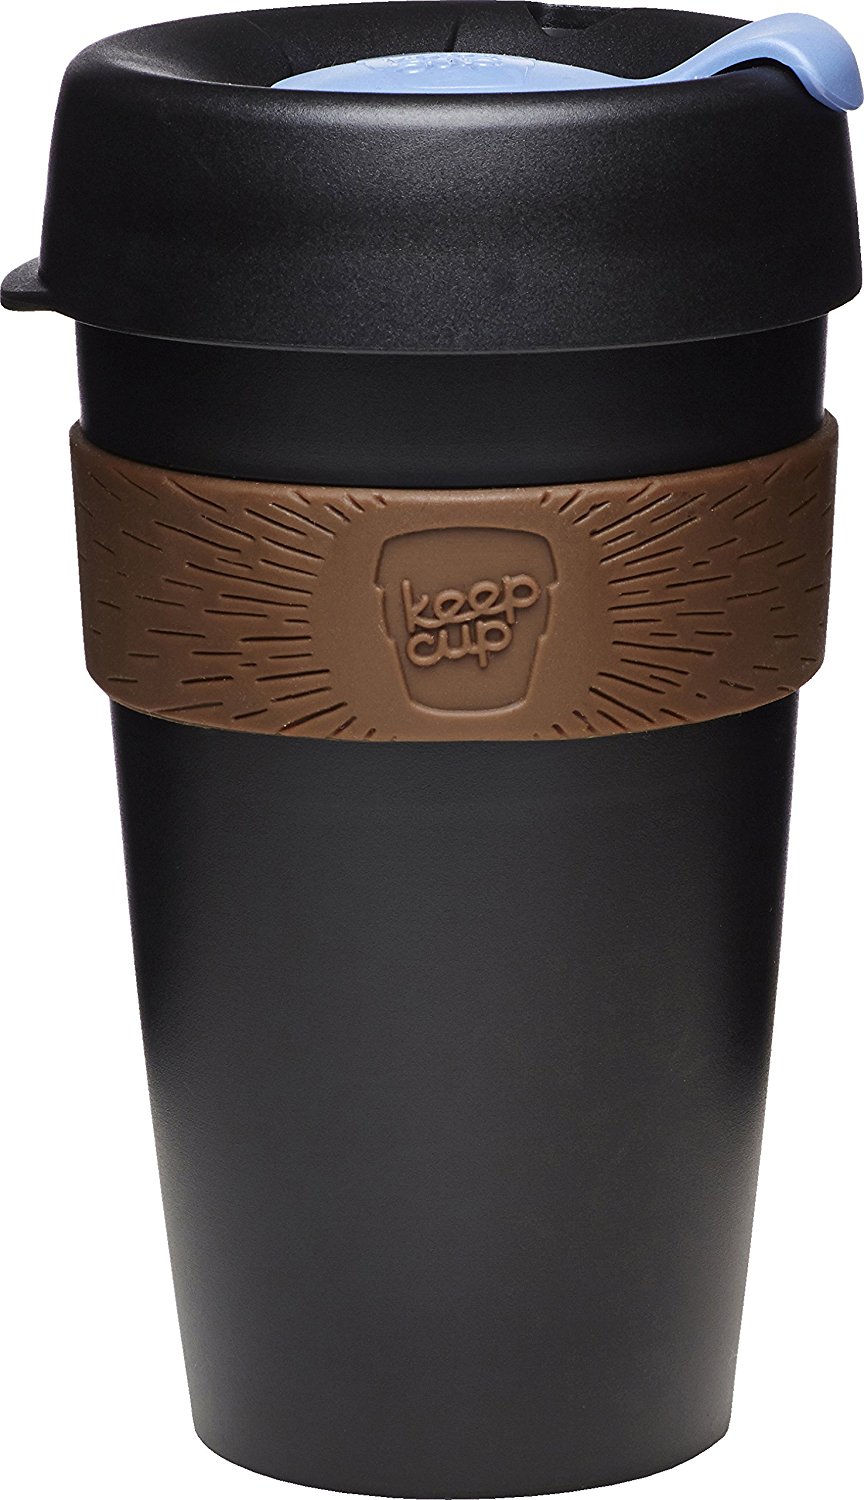 KeepCup Reusable Coffee Cup Review